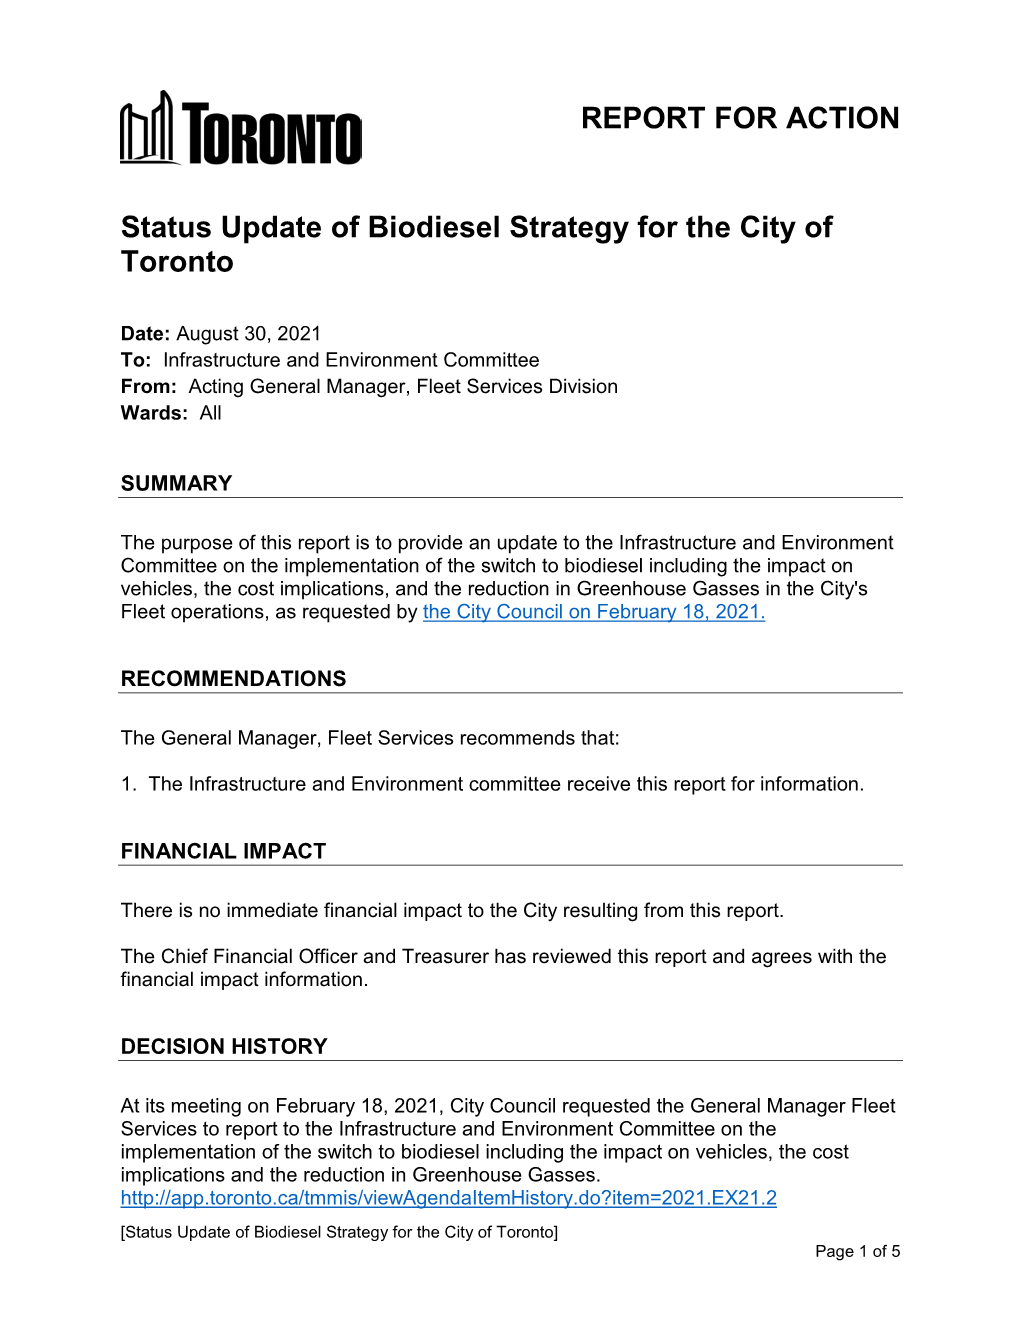 Status Update of Biodiesel Strategy for the City of Toronto